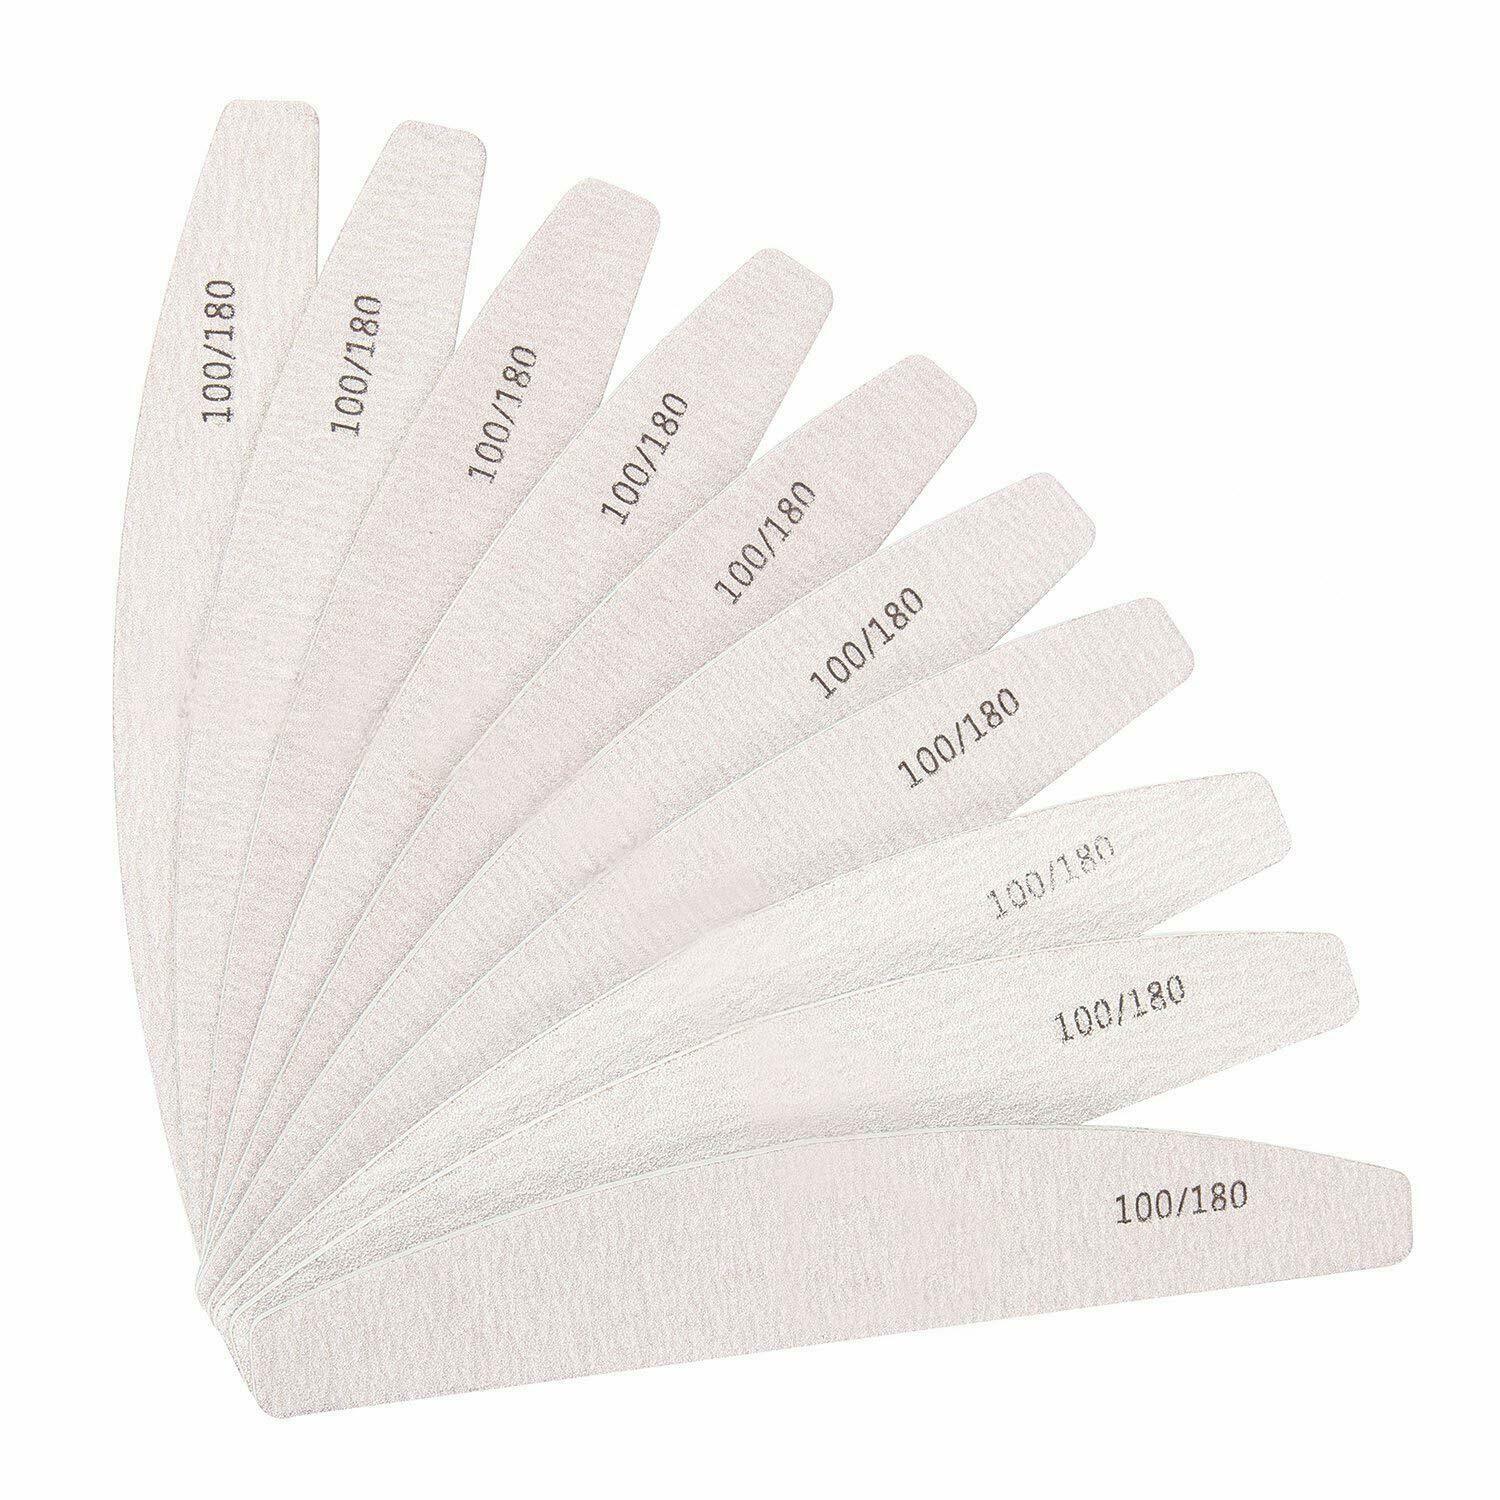 Pro Double Sided Manicure Nail File Emery Boards Grit 100,180 Packs Of 10